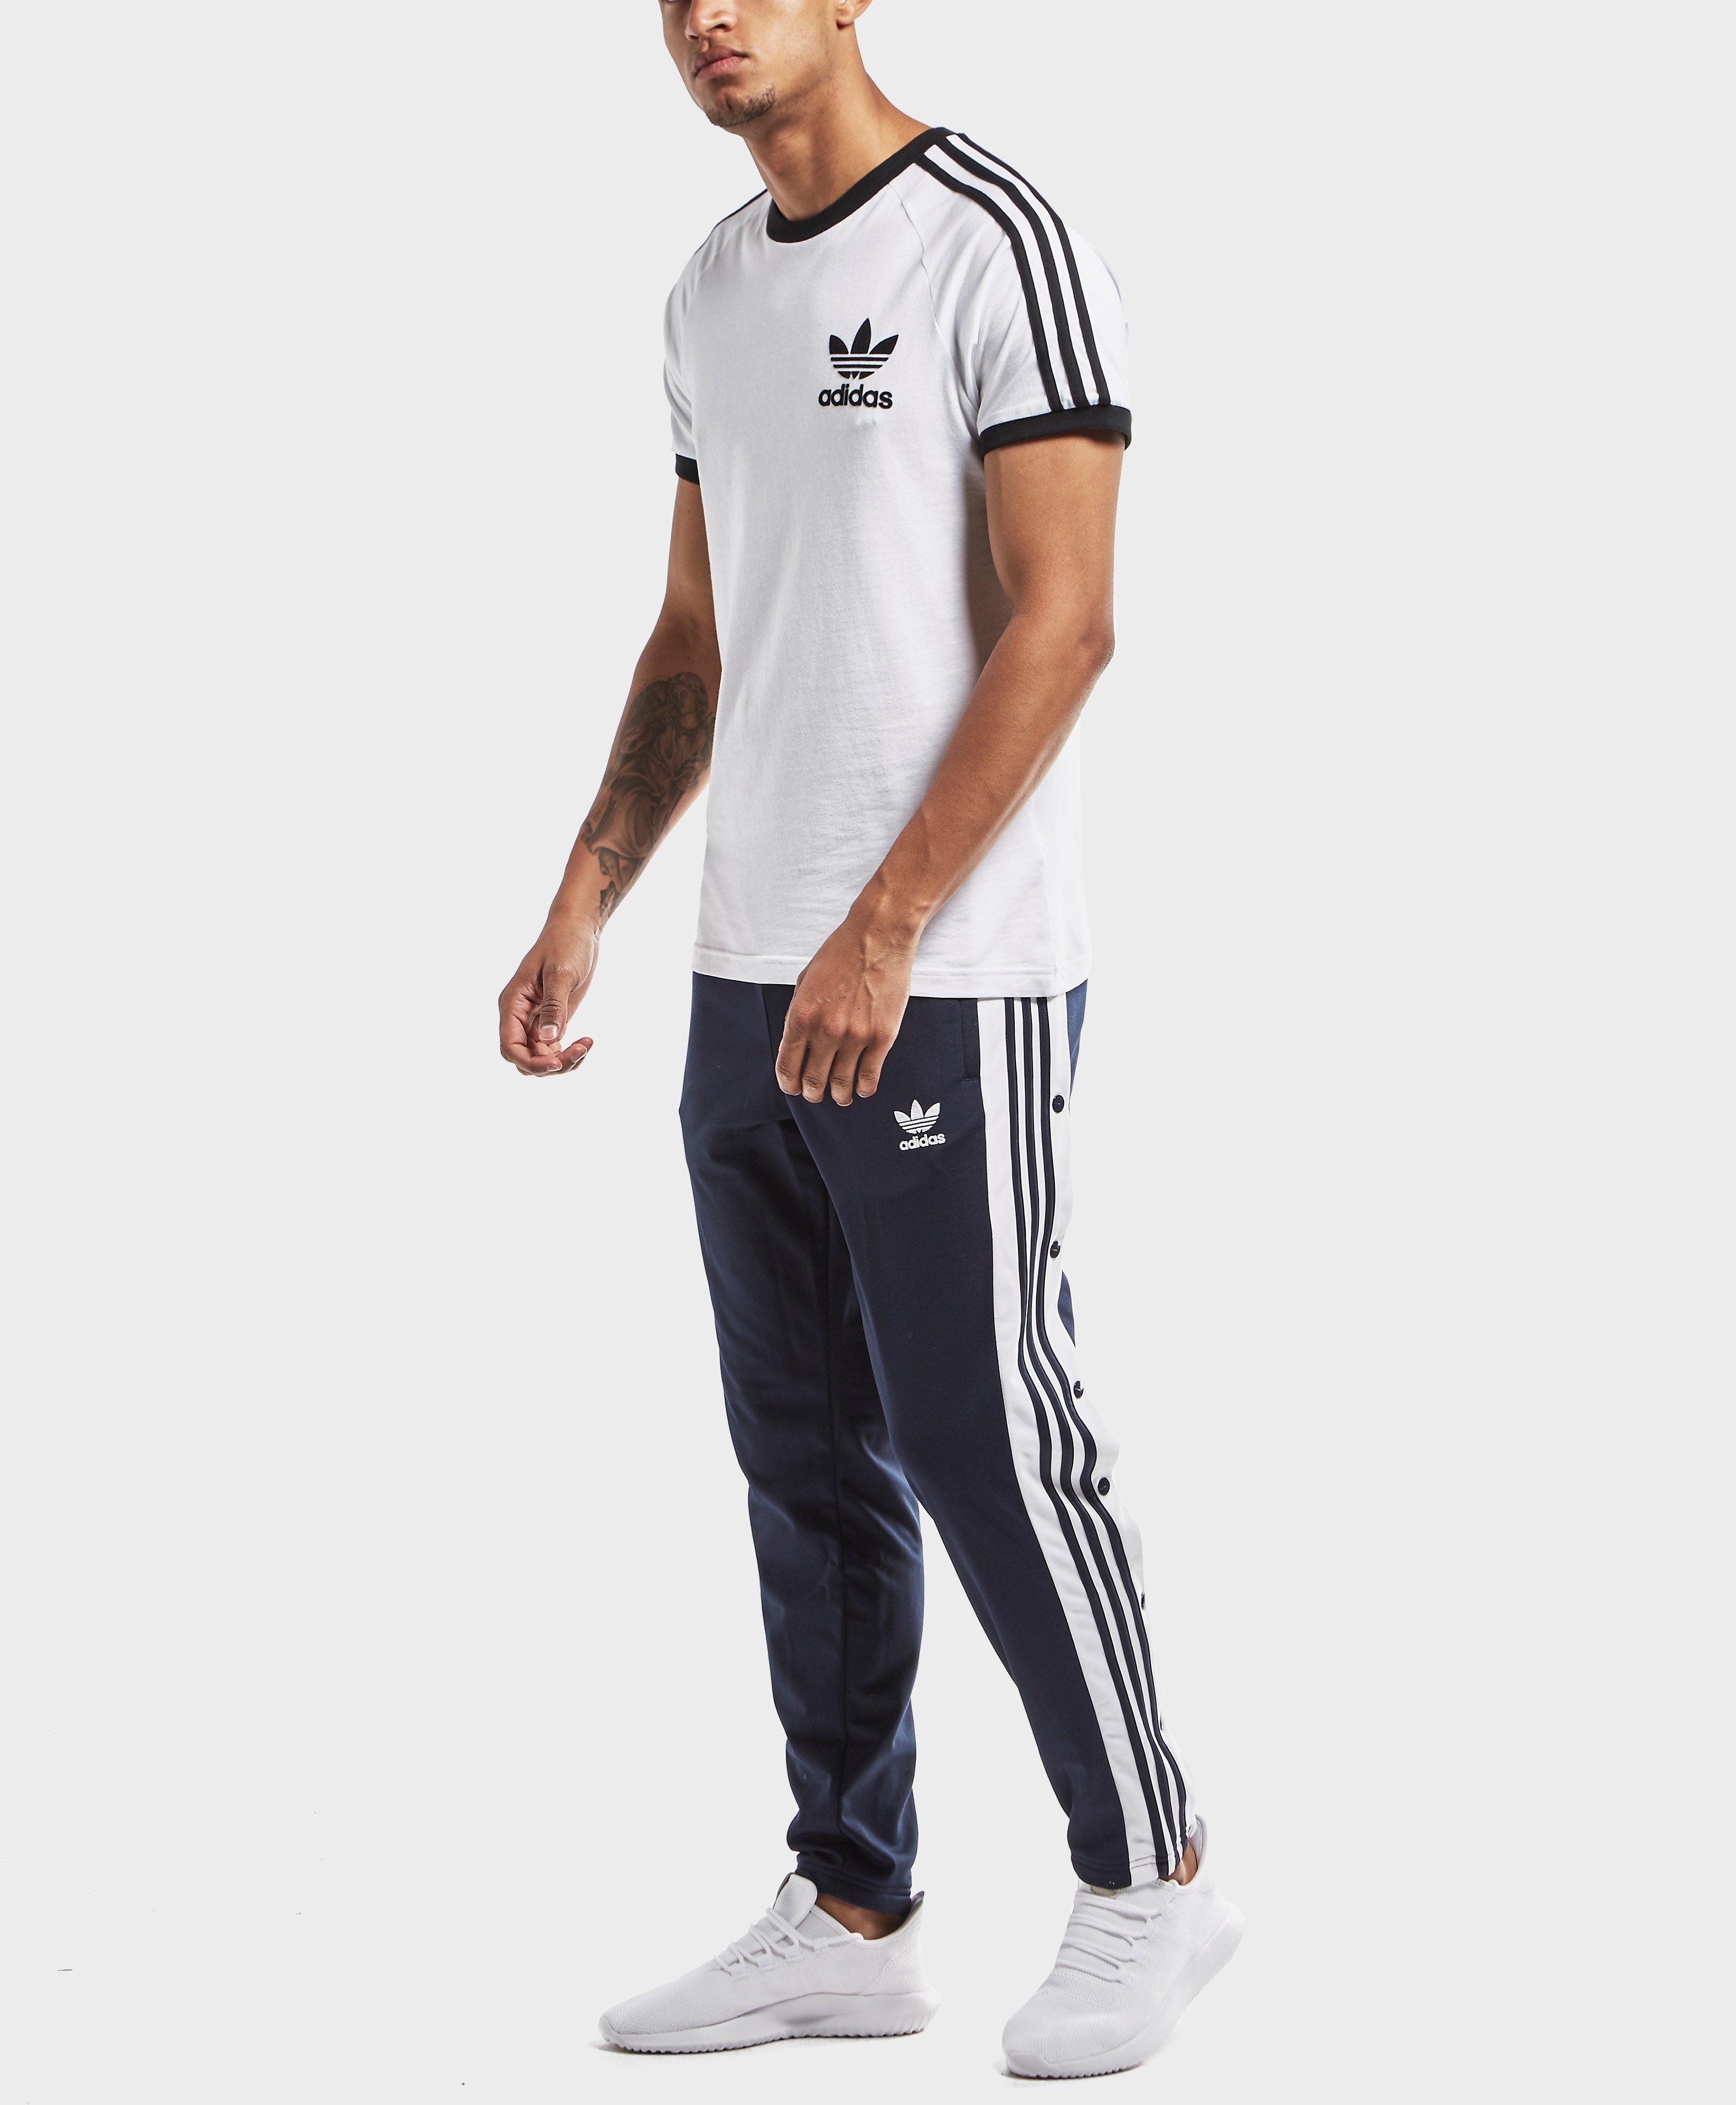 adidas poppers mens